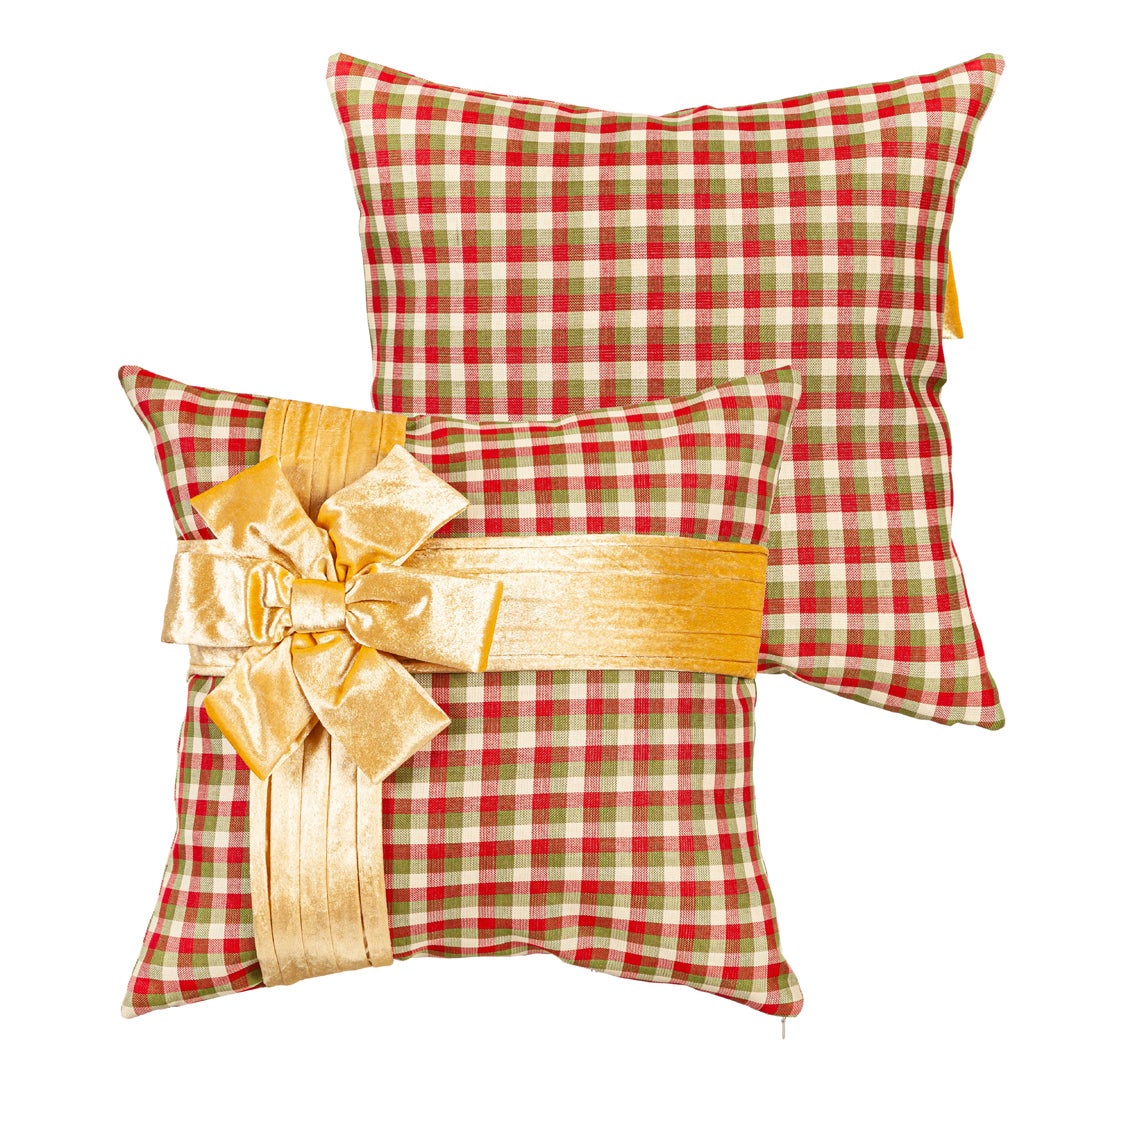 Plaid Present Interchangeable Outdoor Pillow Cover, 18"